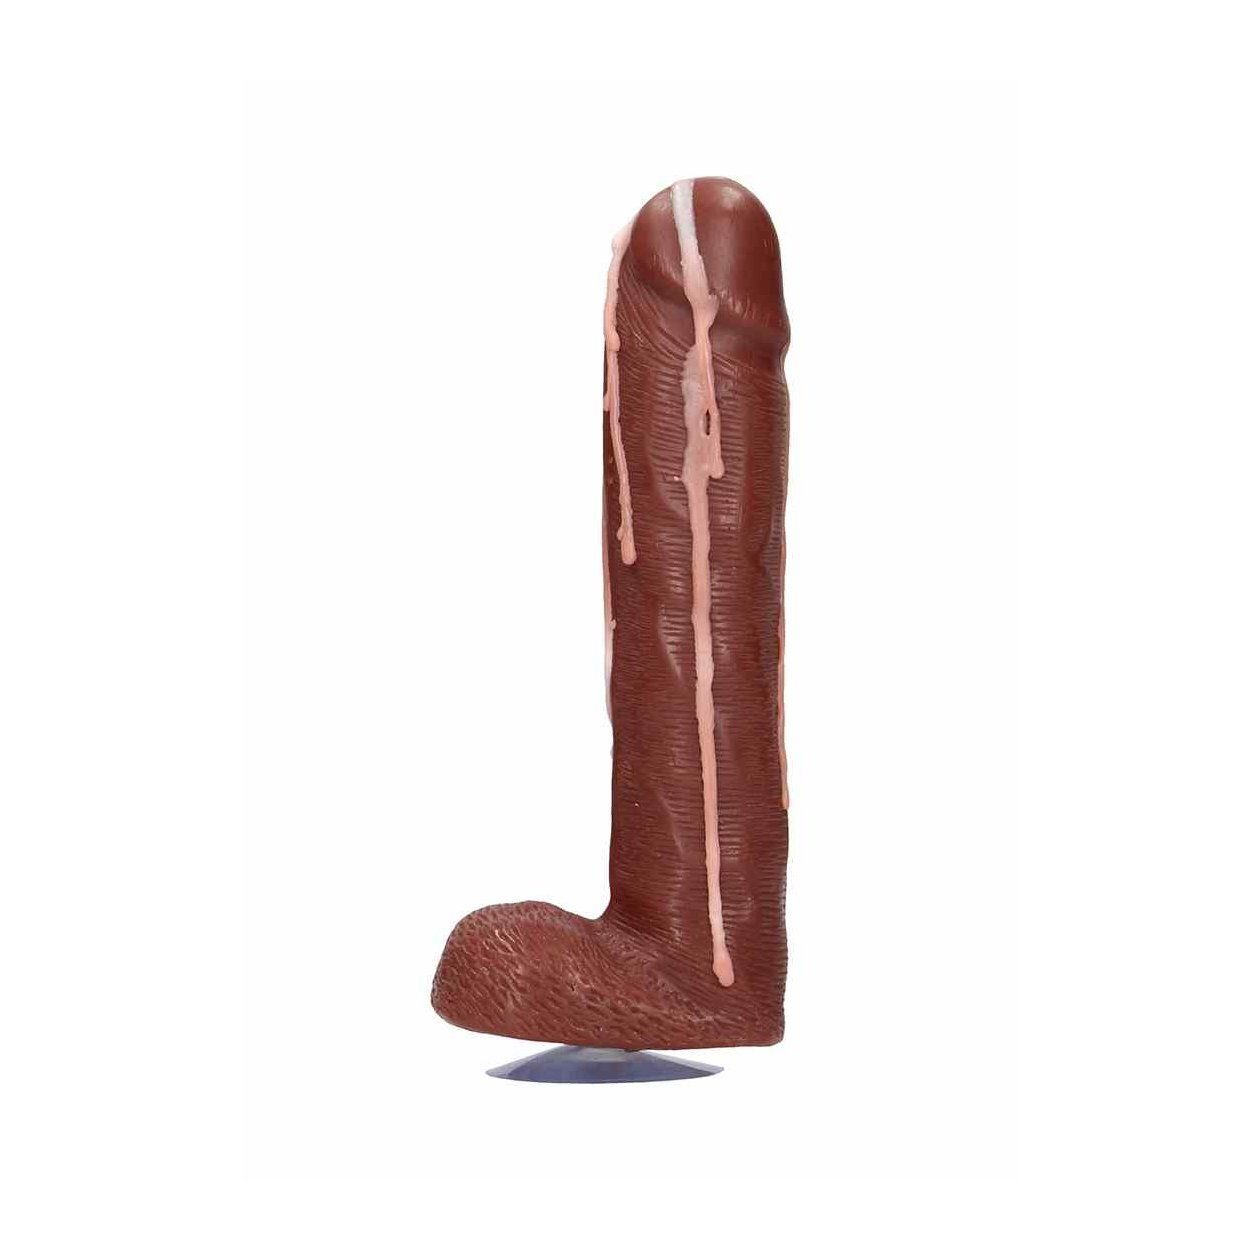 Brown Seife in Soap Handseife Dicky Penisform Toys Shots